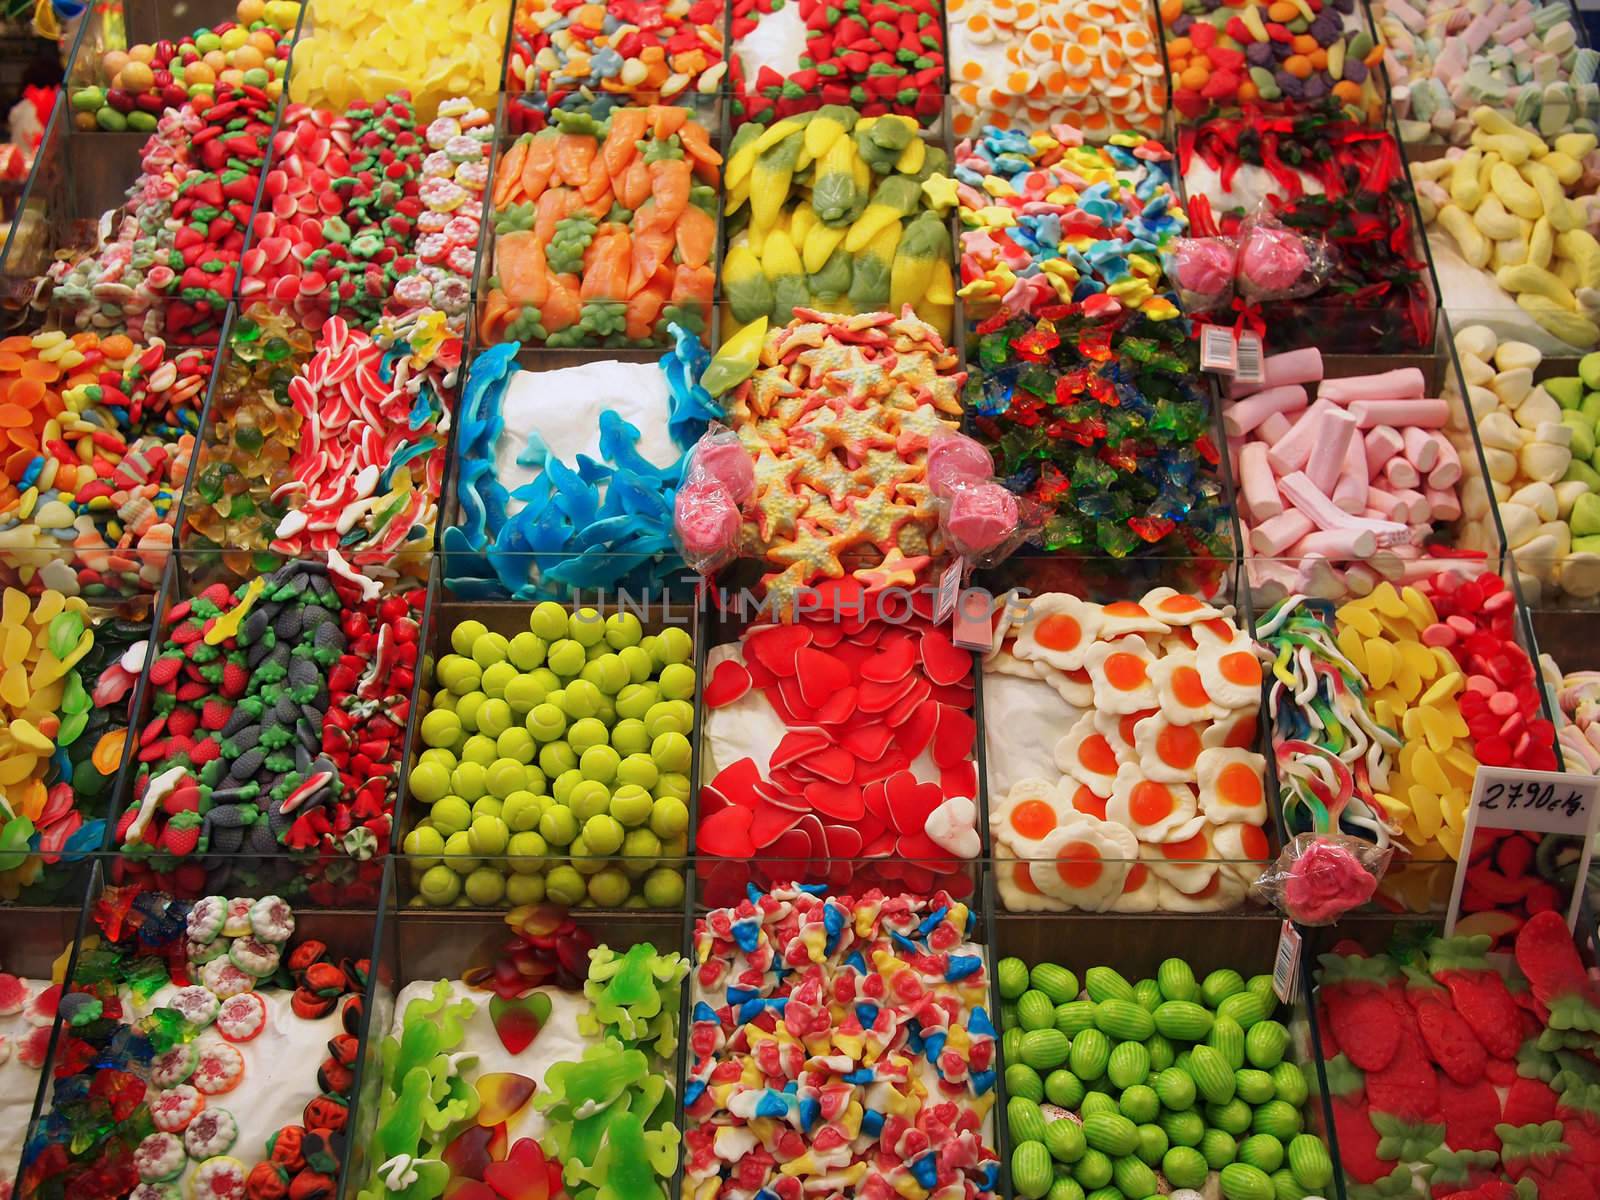 Colorful candy at the candy shop at the market of Boqueria in Barcelona, Spain.